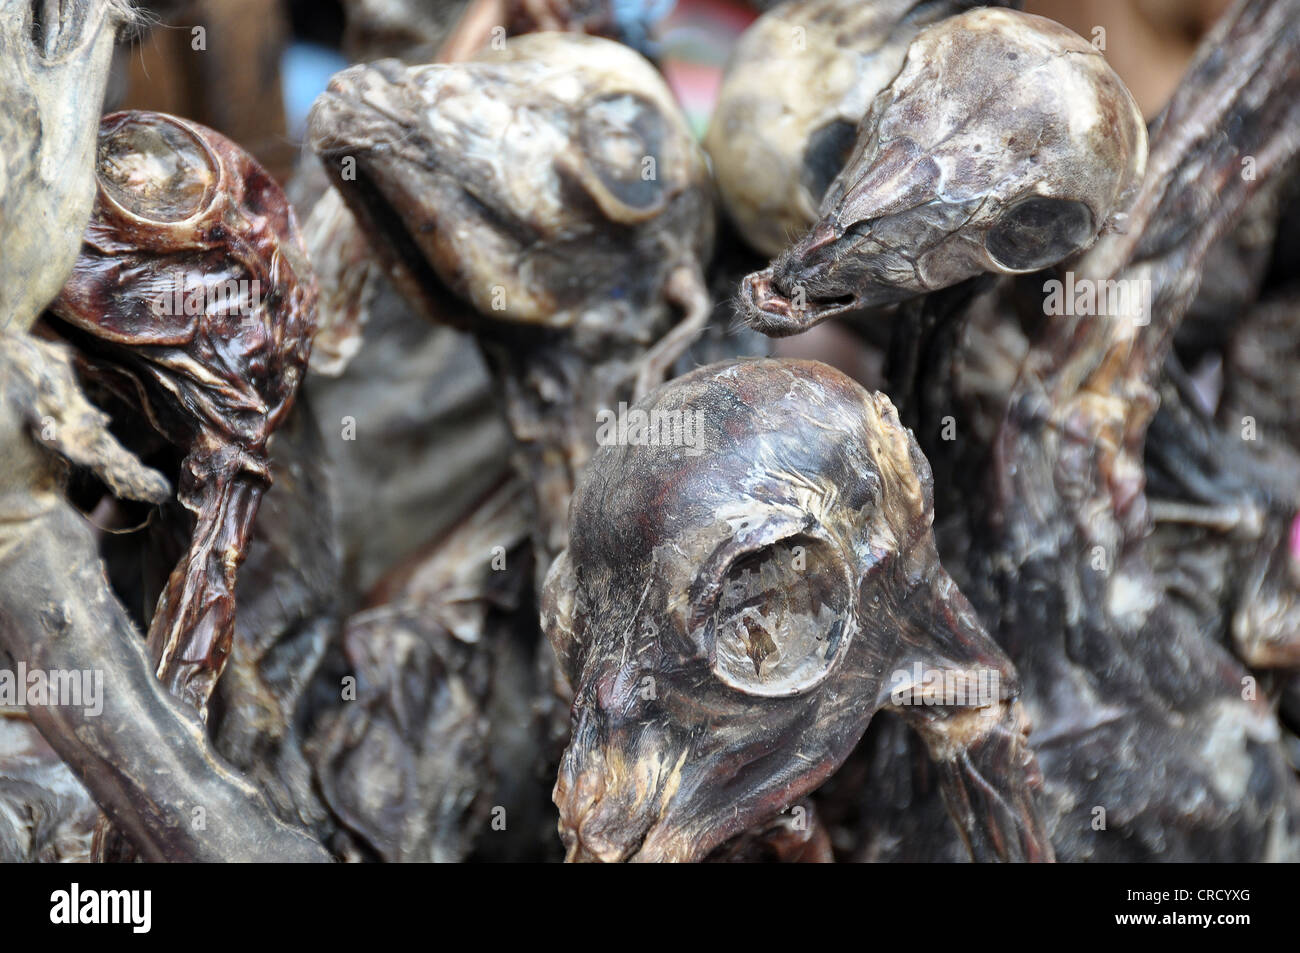 Dried llama fetuses, ancient tradition of the indigenous peoples, Witches Market in La Paz, Bolivia, South America Stock Photo